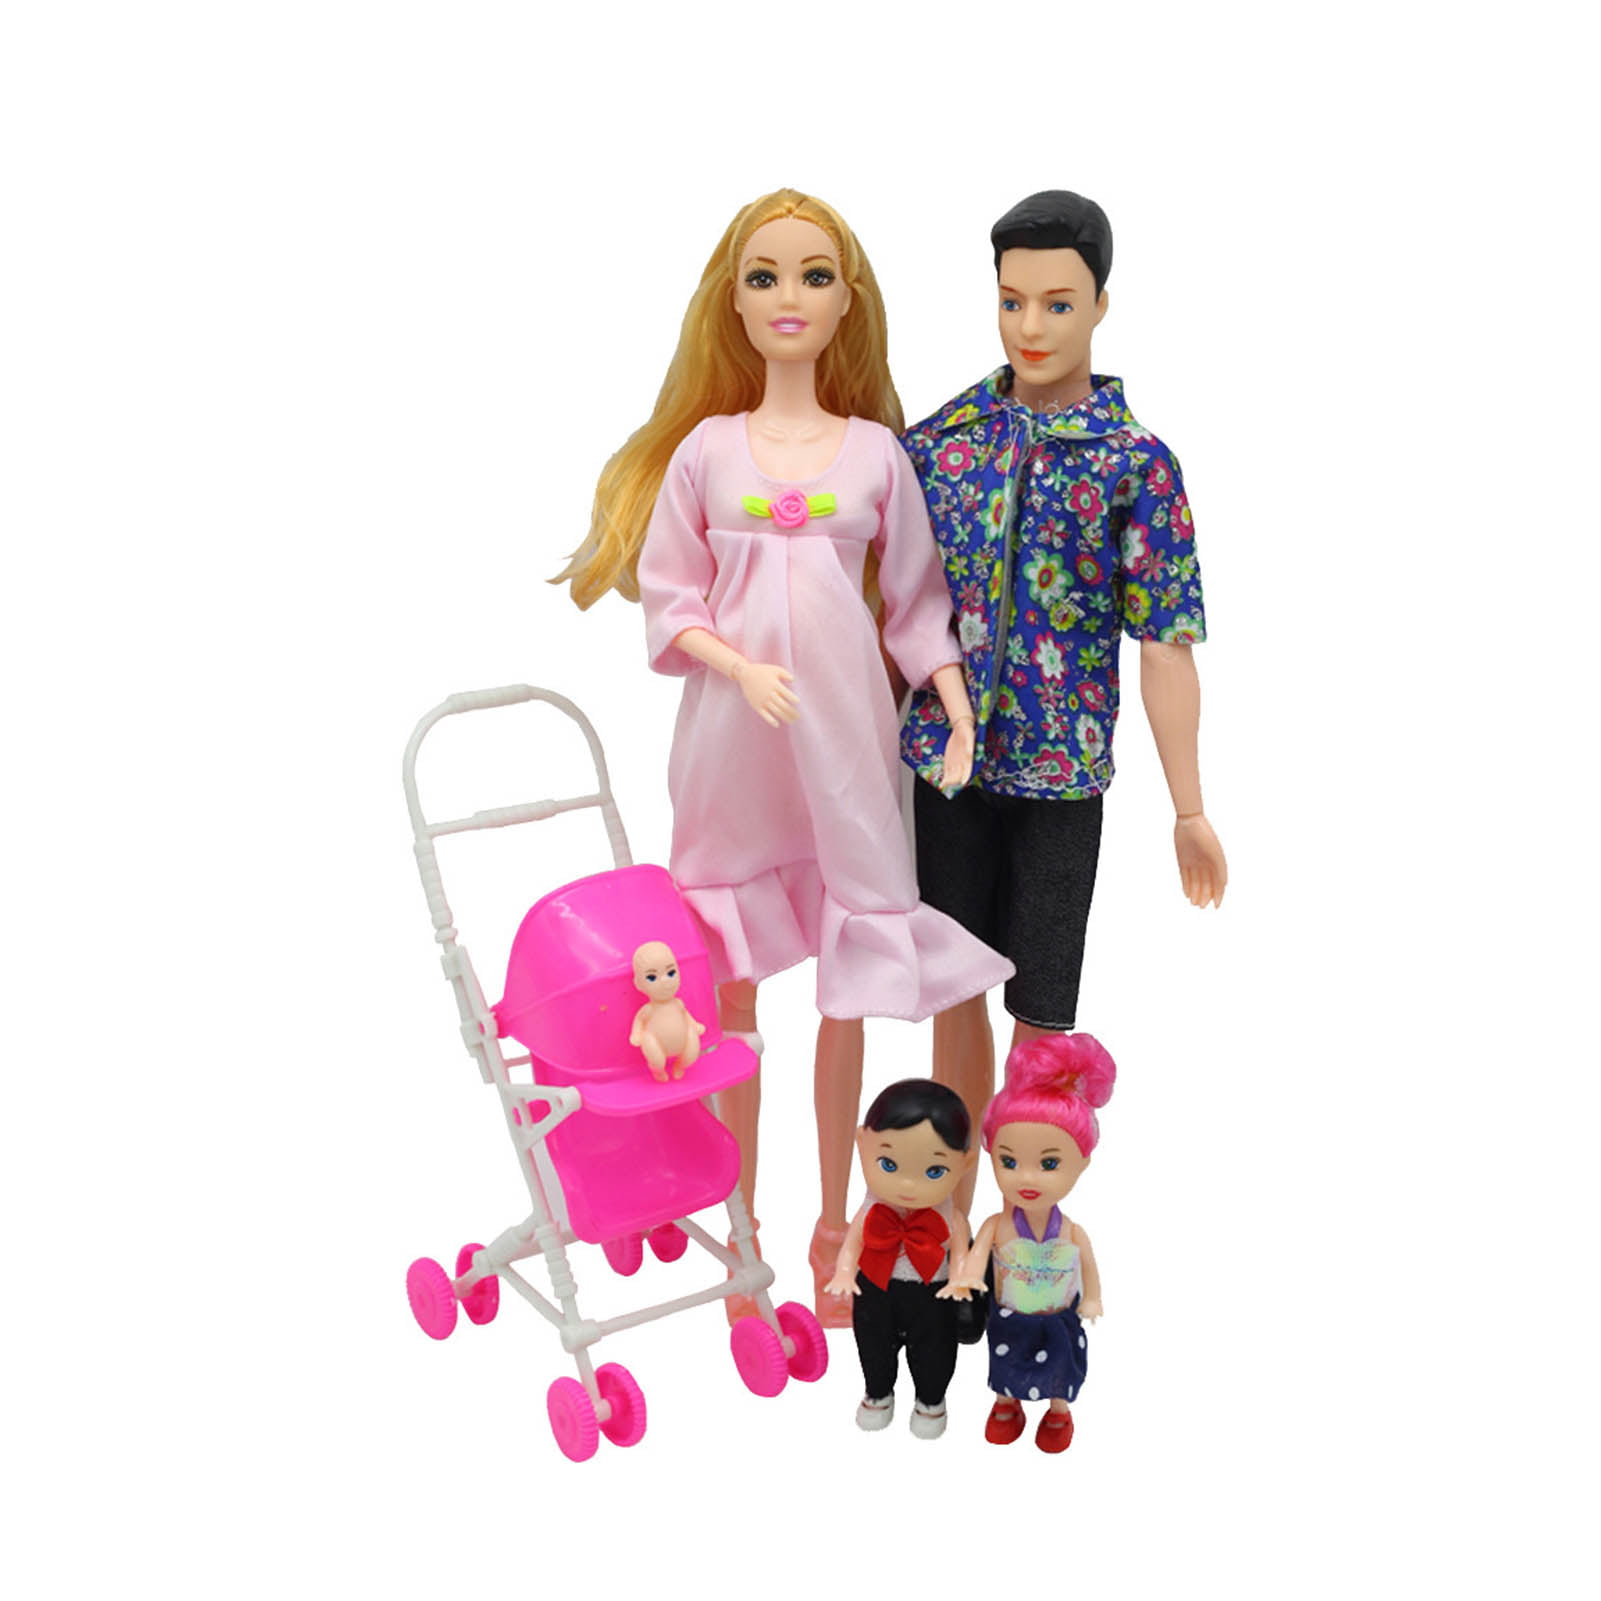 11" Pregnant Doll Removeable Tummy Baby Girl Stroller Role Play Set Toy 